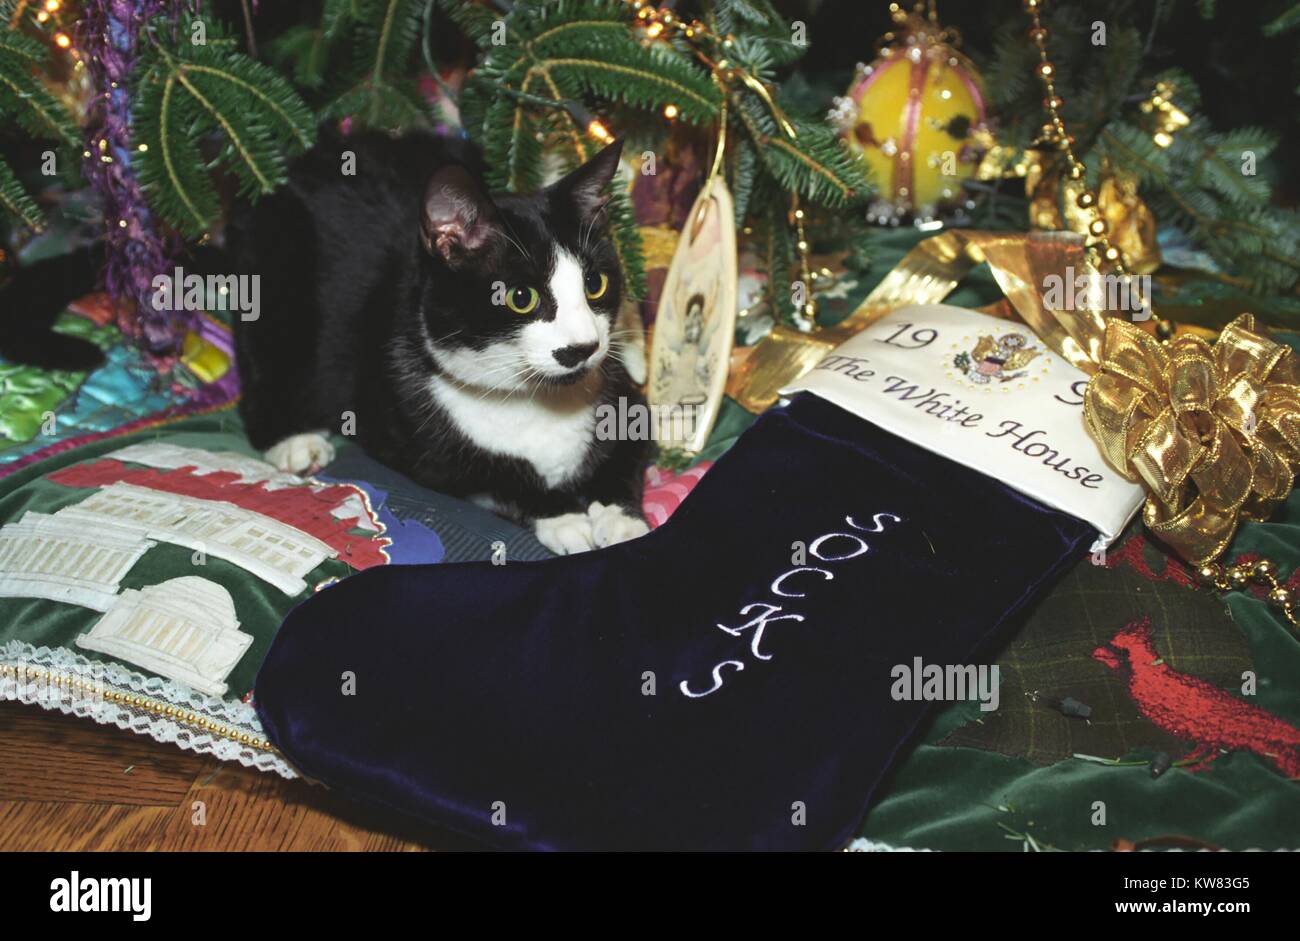 Socks the Cat, the First Pet of President Bill Clinton and First Wife Hillary Rodham Clinton, with black fur, white face, and amber eyes, rests on the skirt at the base of the Christmas tree decorated for the holidays at the White House, guarding his navy velvet holiday stocking monogrammed with his name, 'Socks, ' Washington, District of Columbia, December 21, 1993. Stock Photo